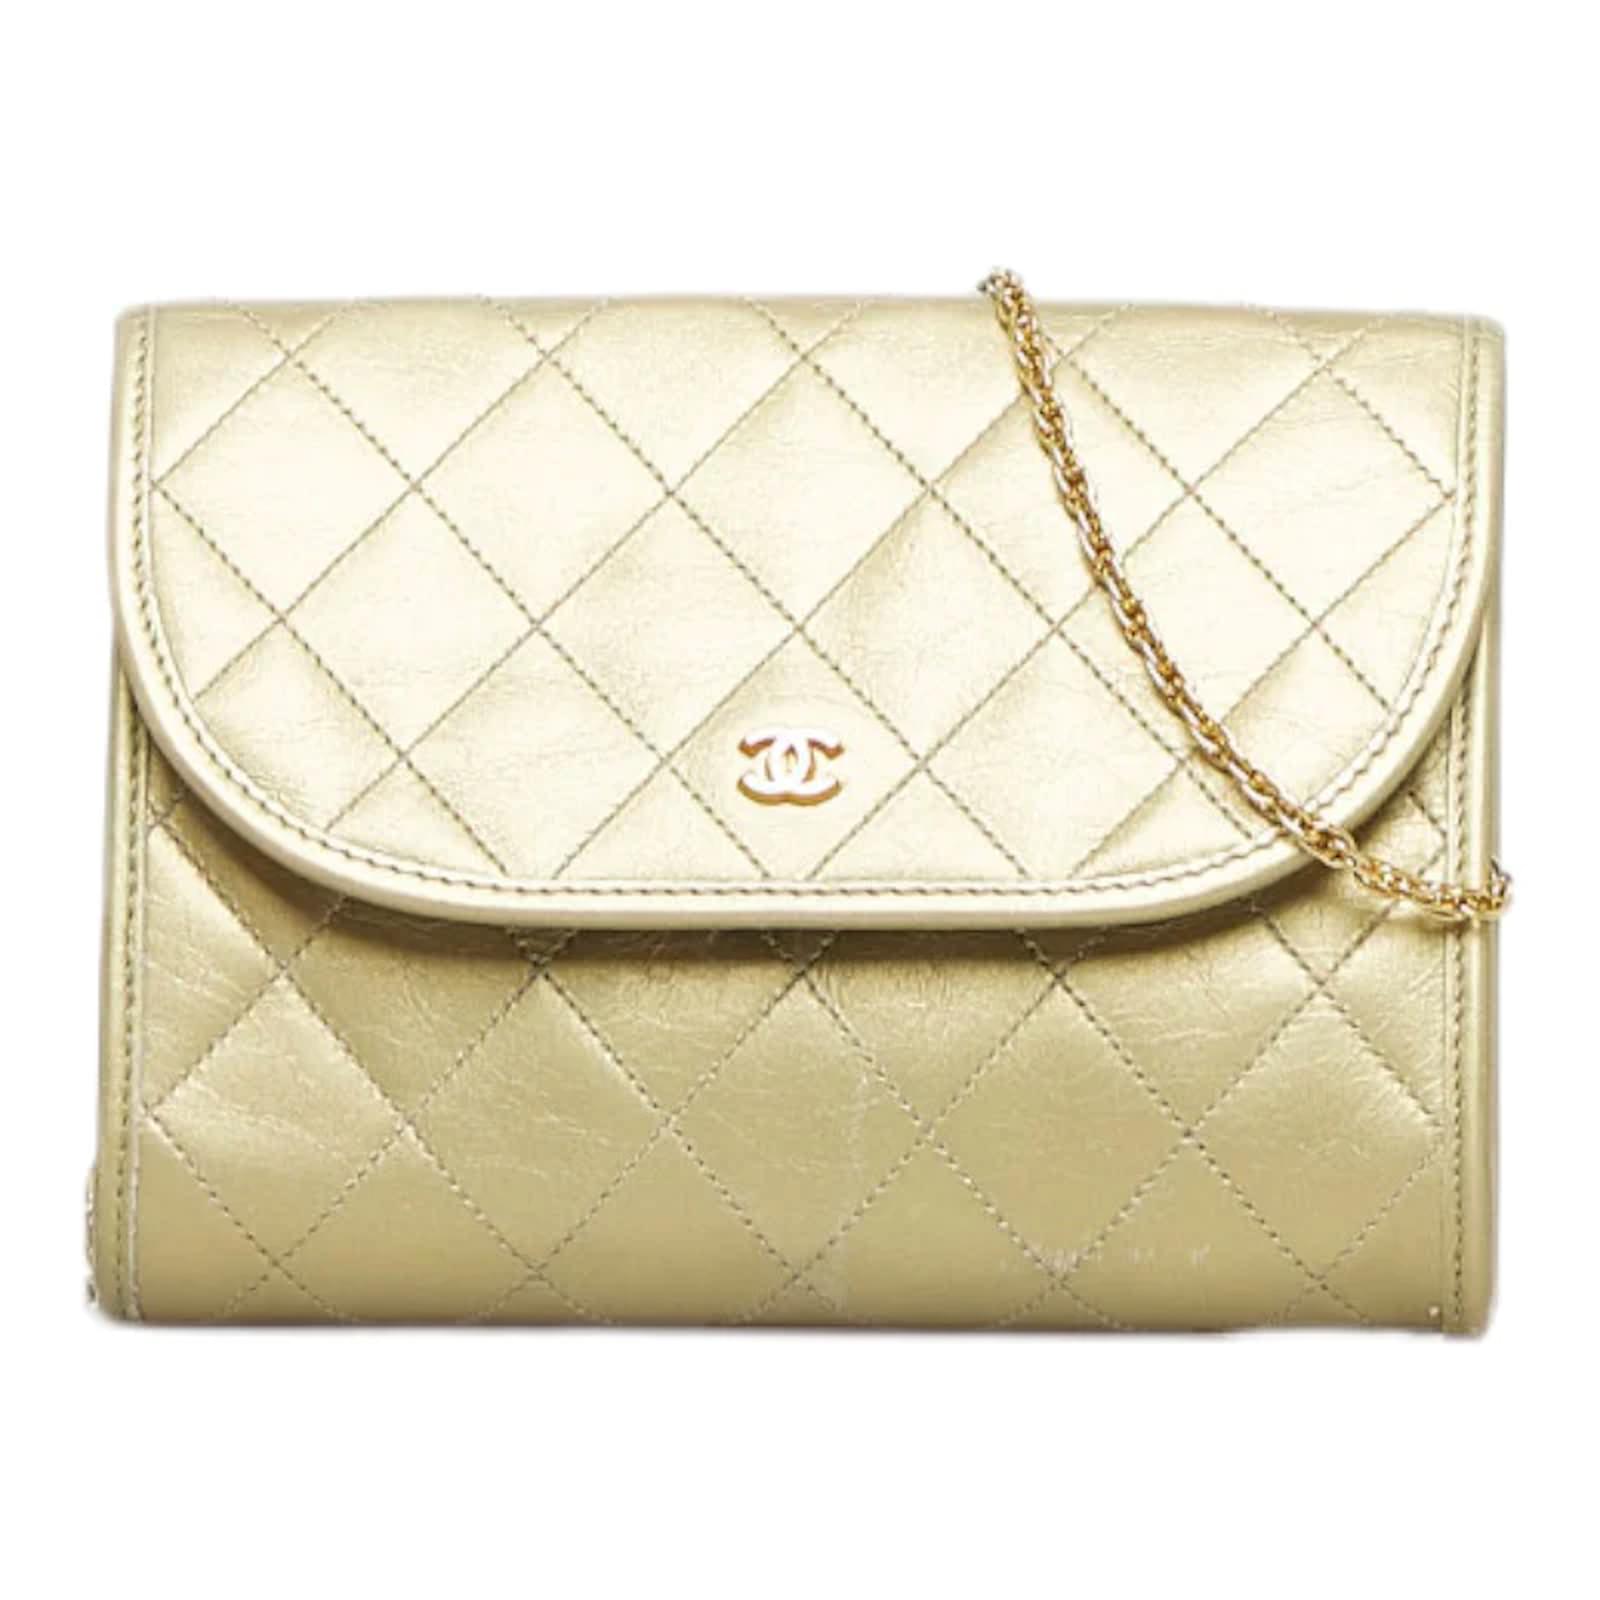 Chanel Mini Quilted Leather Chain Shoulder Bag Golden Pony-style